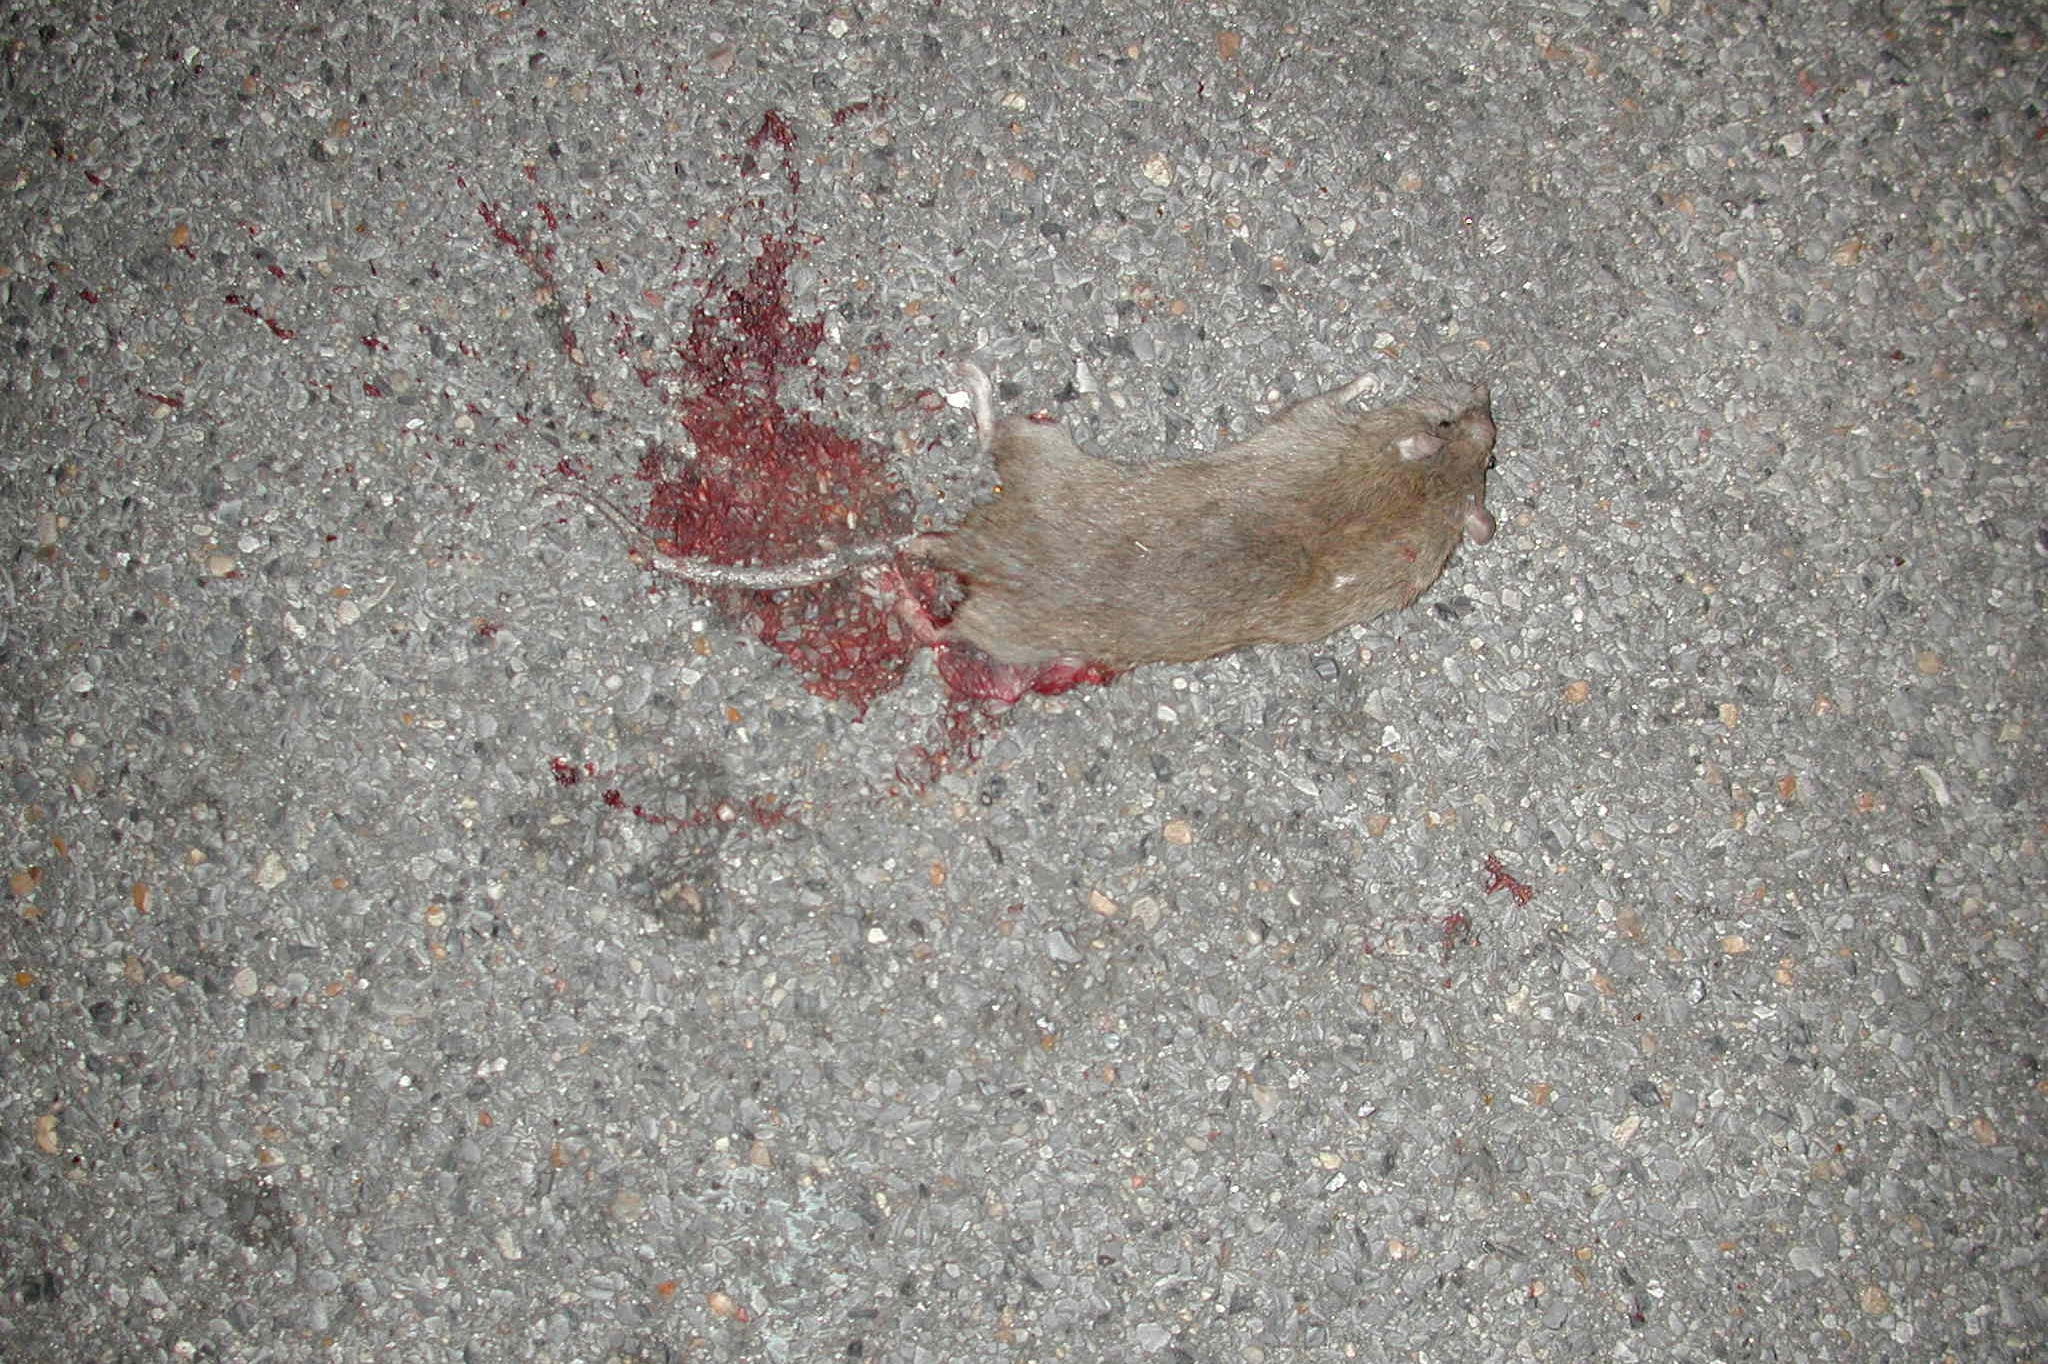 a brown object with red paint on it is laying on the pavement